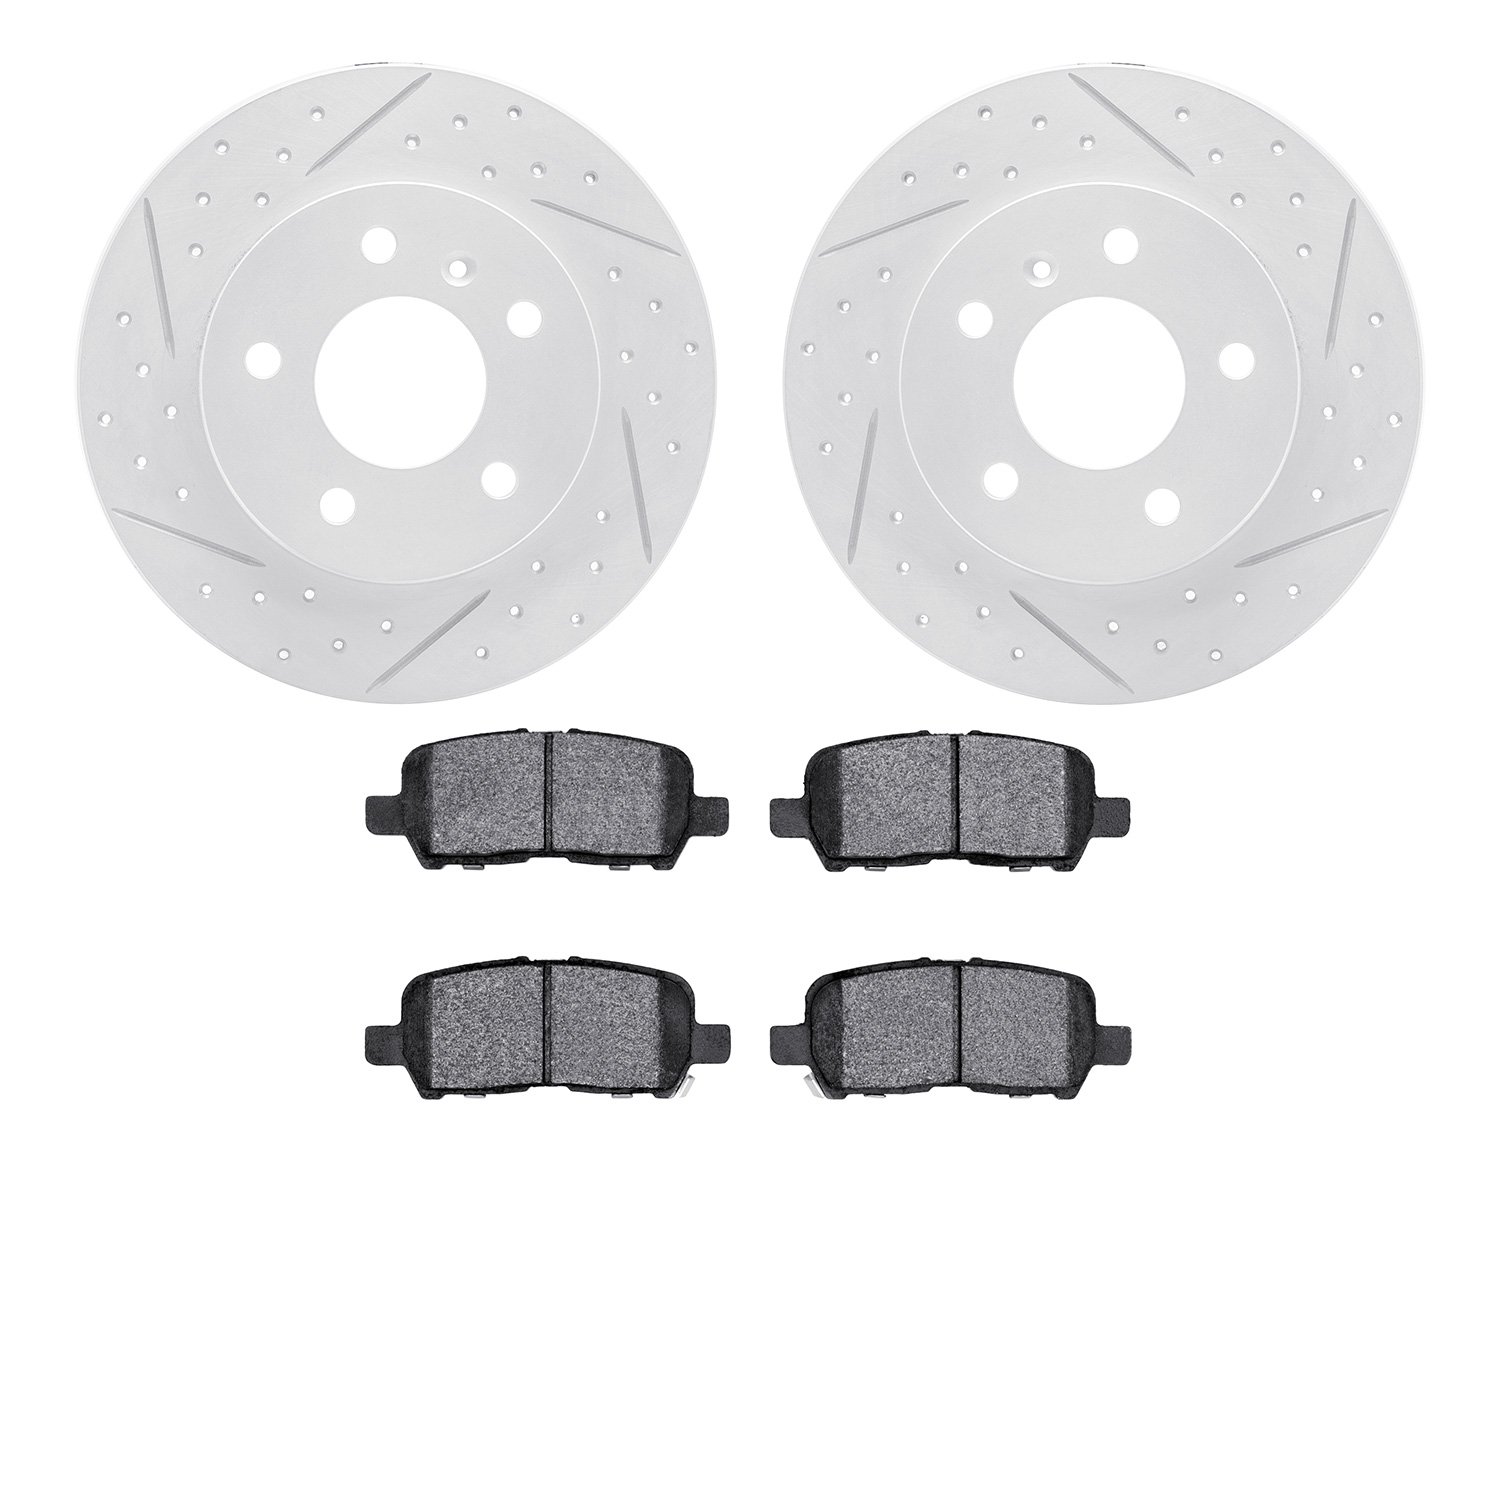 2502-47030 Geoperformance Drilled/Slotted Rotors w/5000 Advanced Brake Pads Kit, 2004-2016 GM, Position: Rear